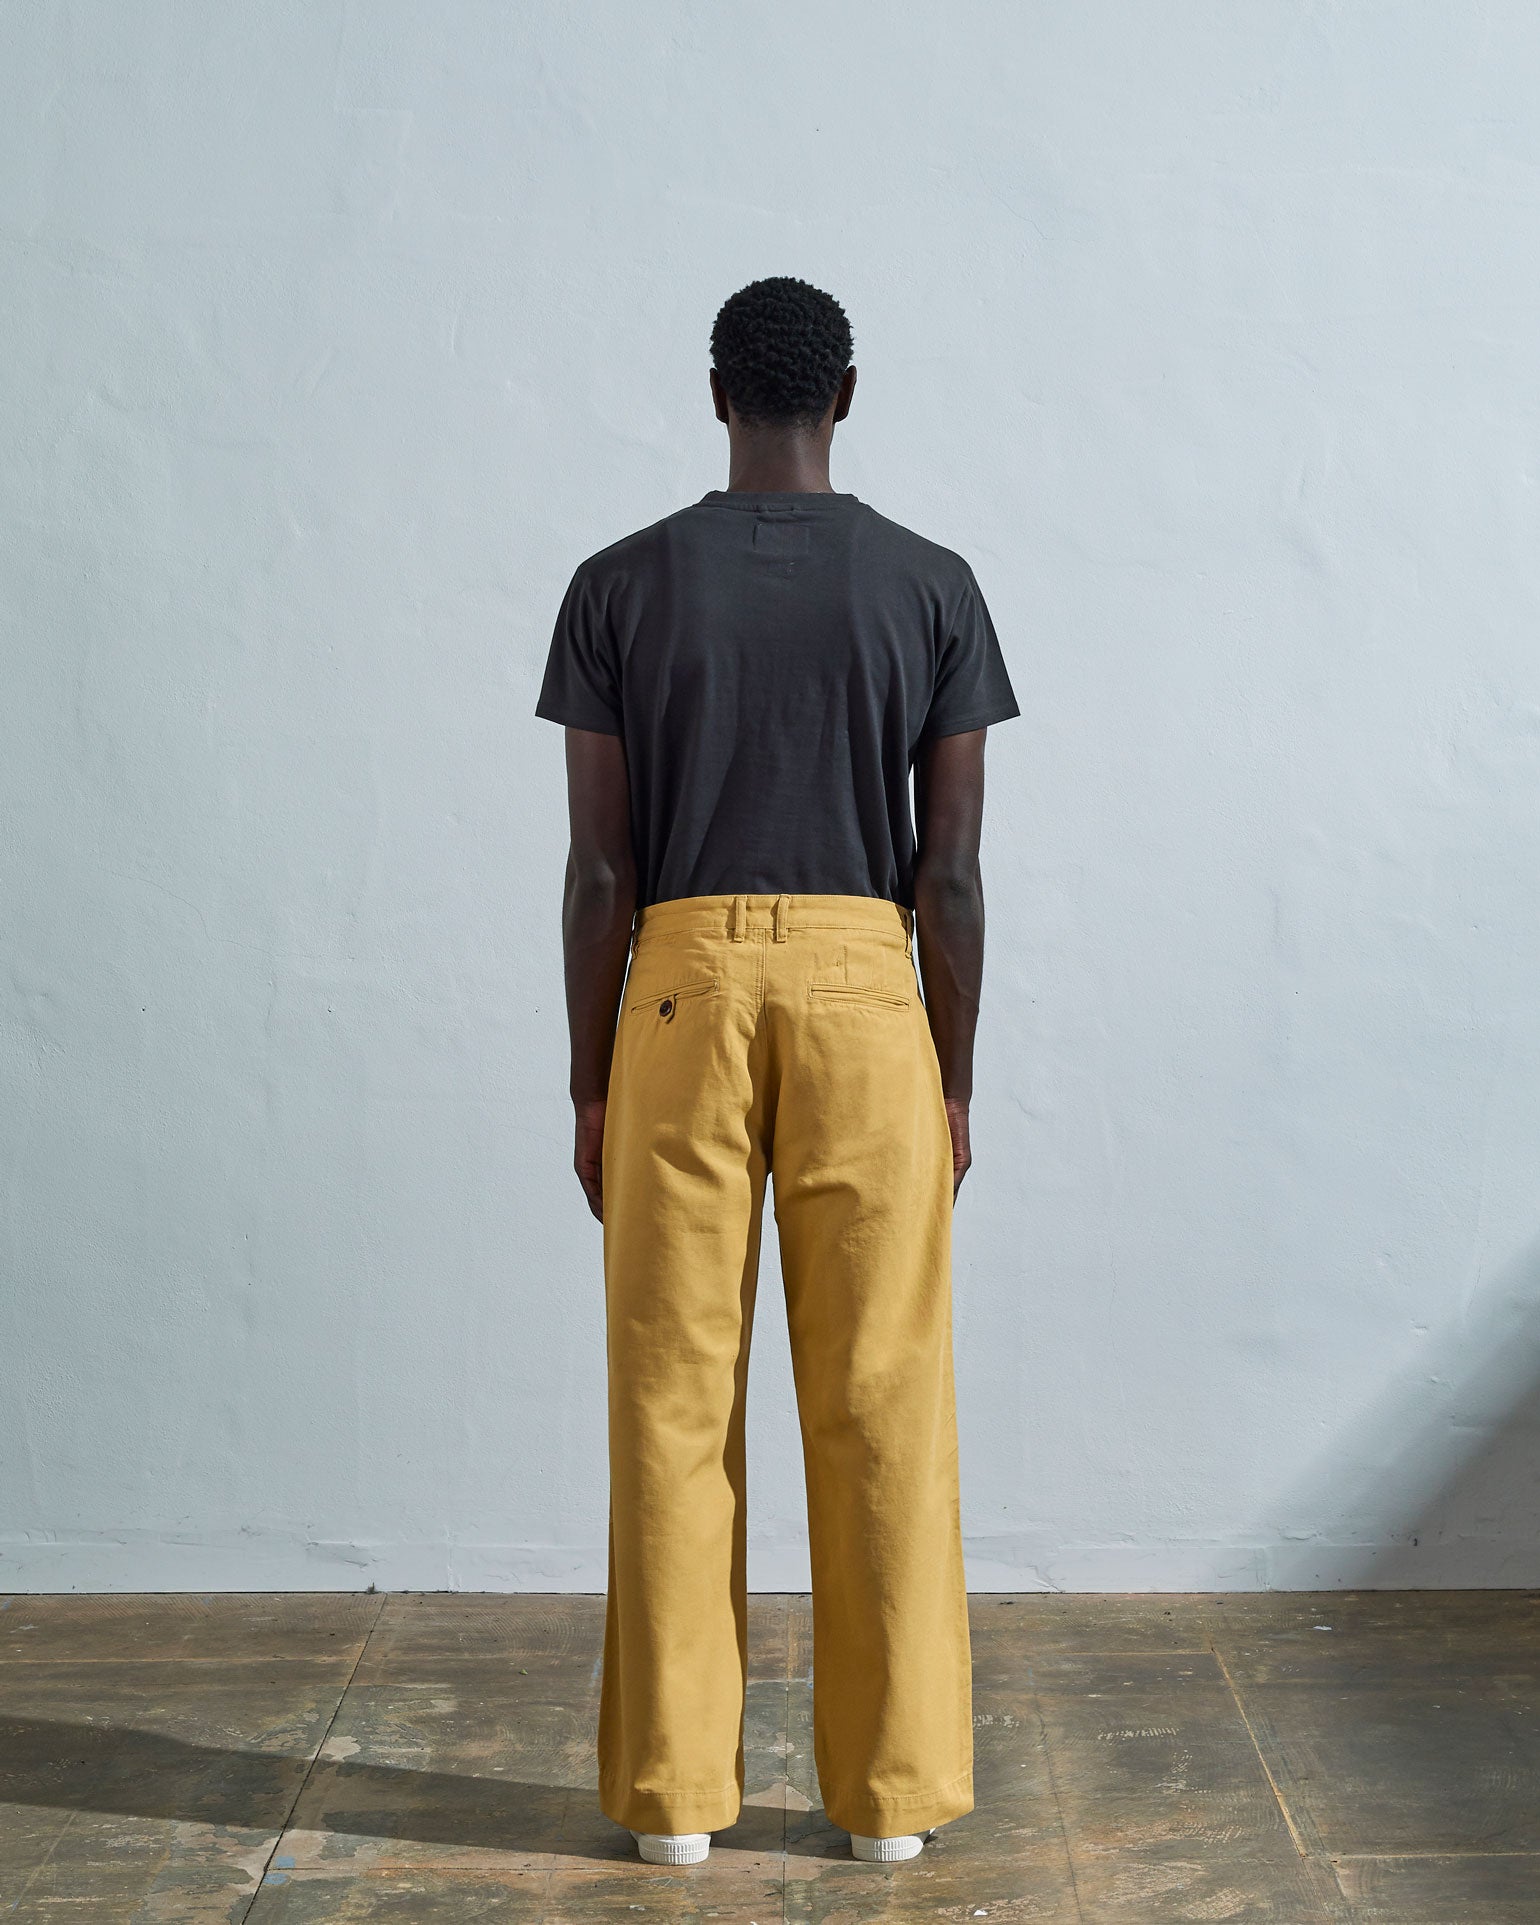 Full-length back view of model wearing #5018, citronella yellow mid-weight cotton boat pants. Showing rear pockets, belt loops and vintage inspired silhouette.